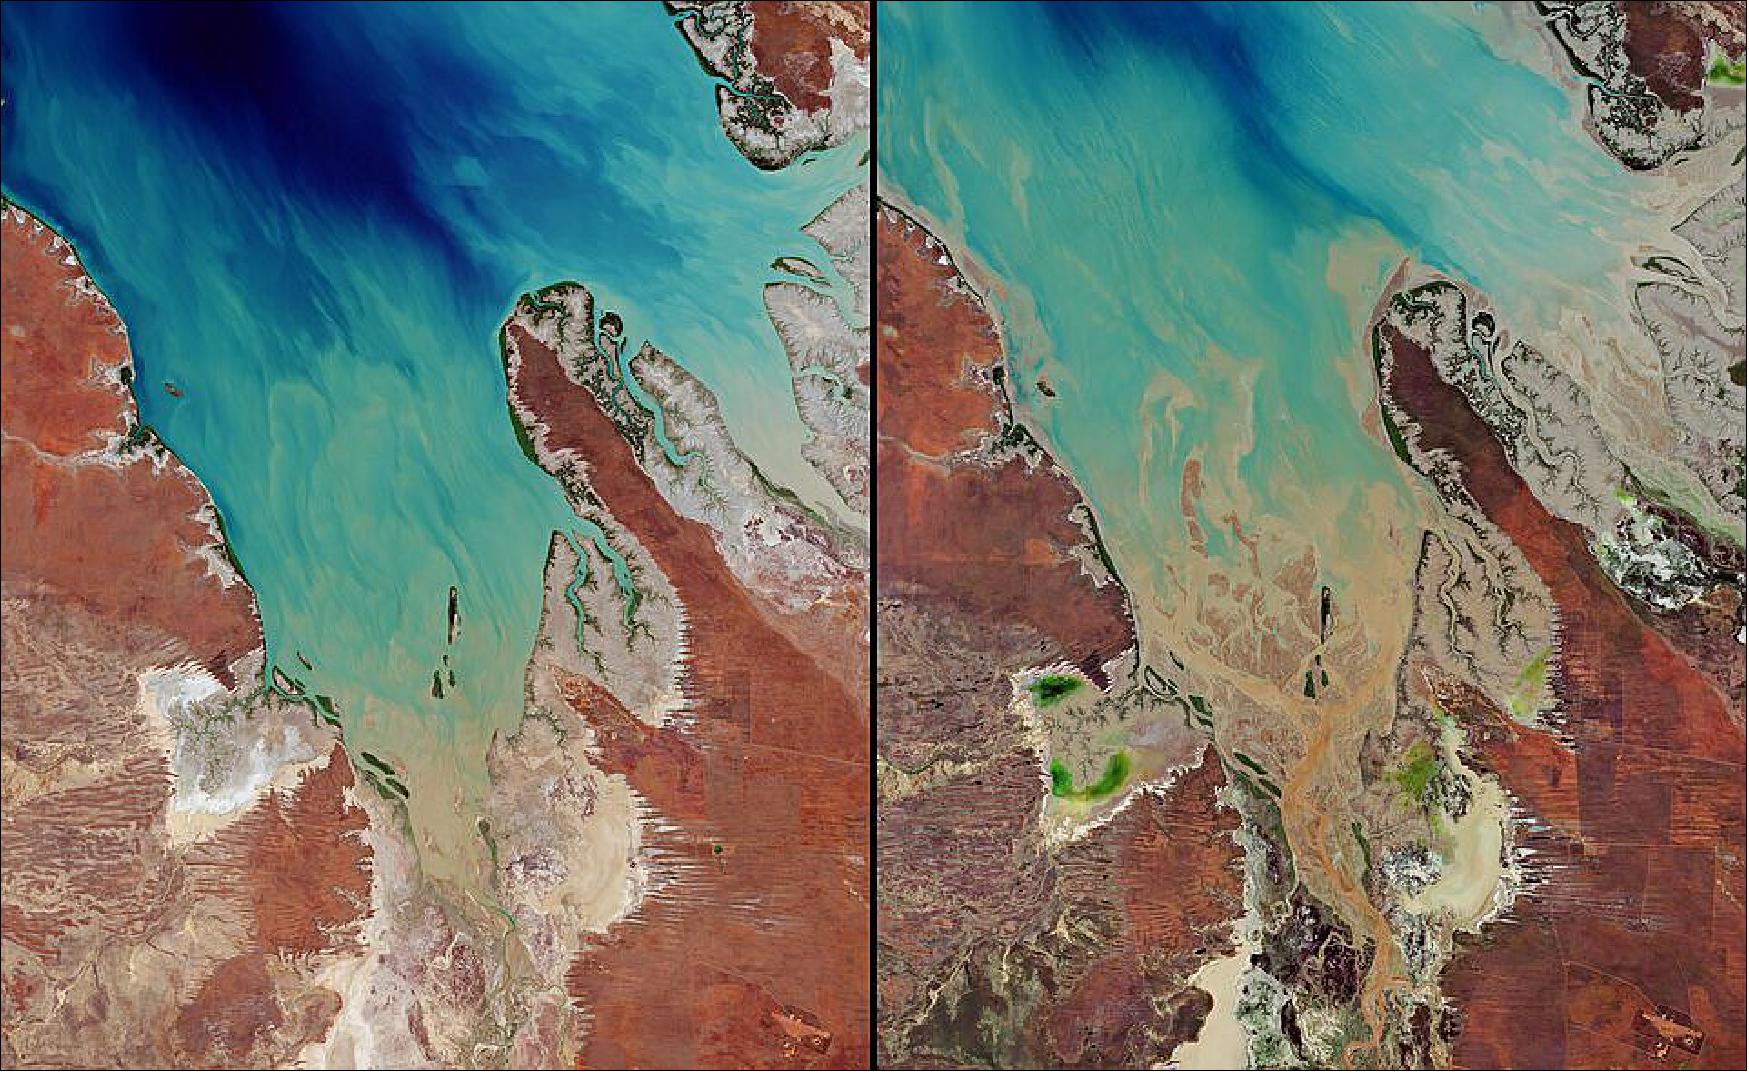 Figure 73: These images show the result of the floods brought on by heavy rainfall that hit Western Australia in late 2020. The image on the left was captured on 11 November 2020, while the image on the right was taken around a month later, on 16 December 2020 (image credit: ESA, the image contains modified Copernicus Sentinel data (2020), processed by ESA, CC BY-SA 3.0 IGO)